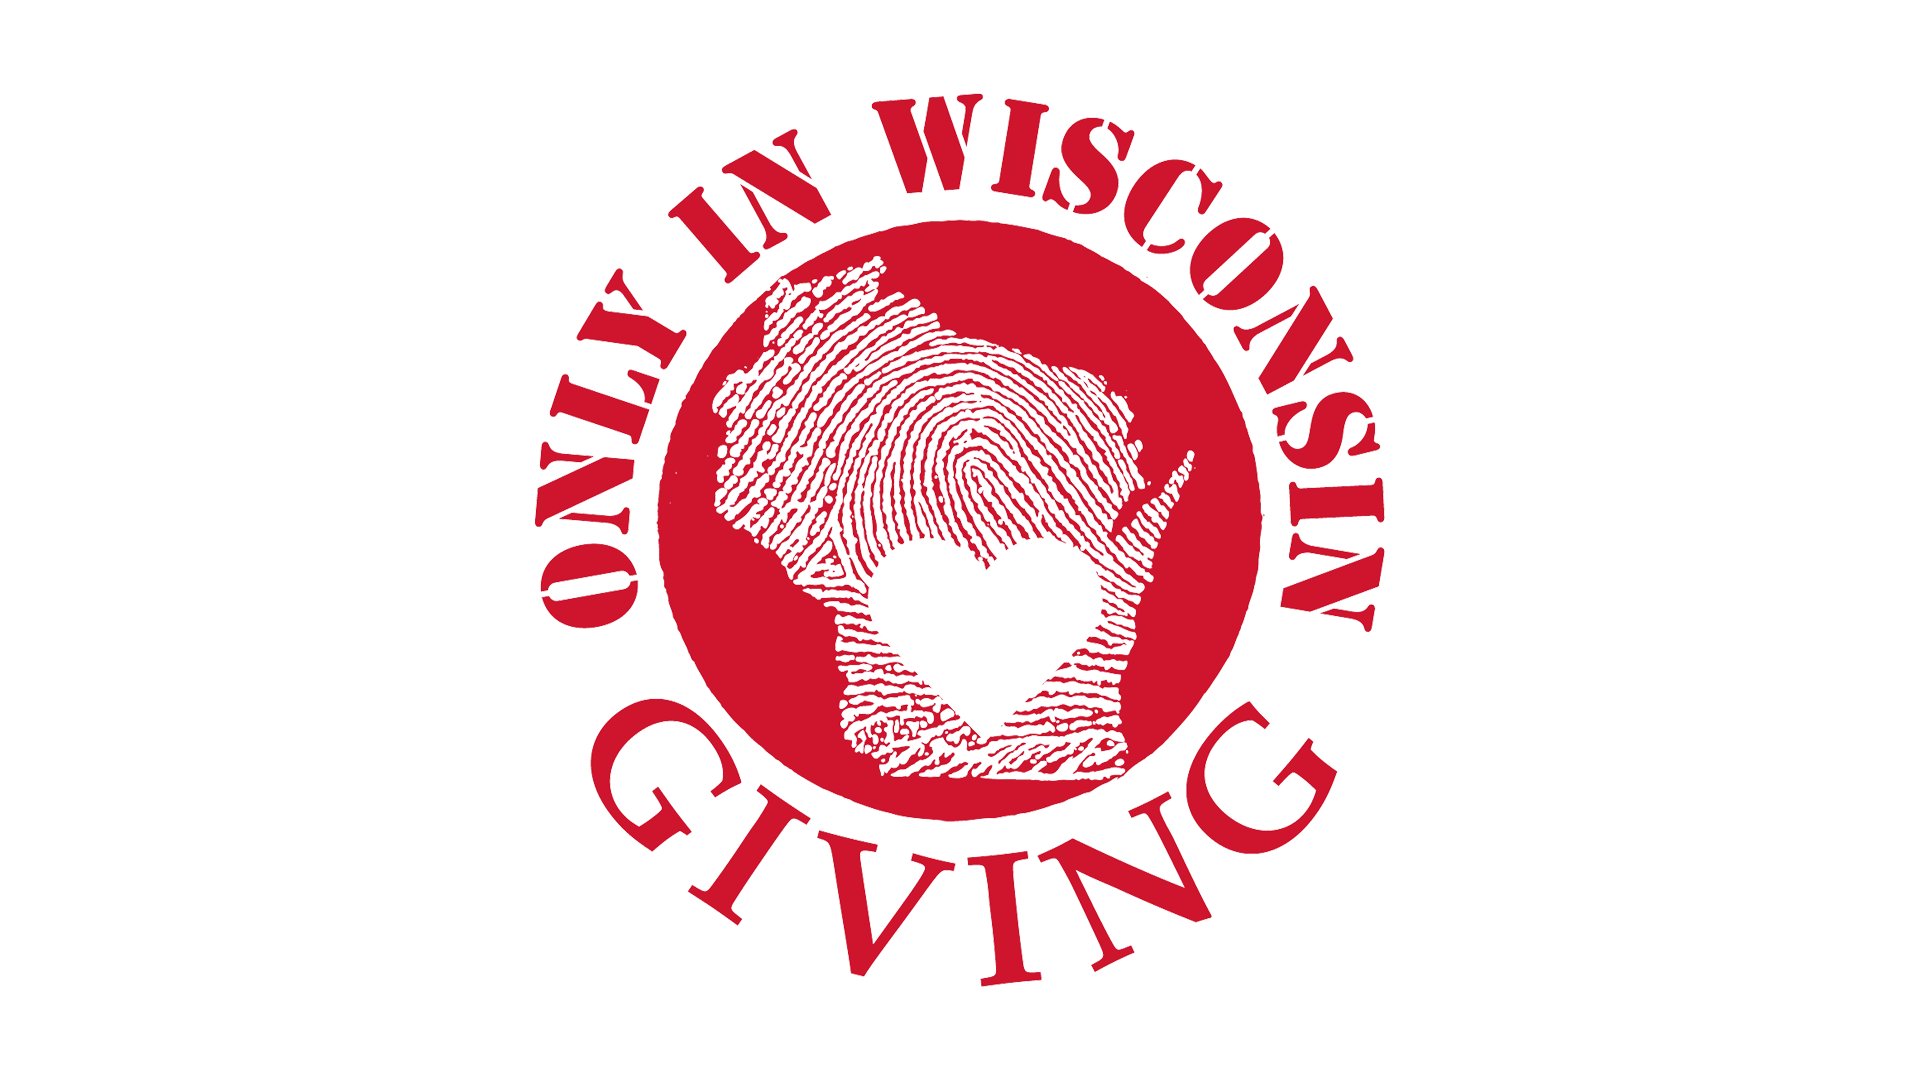 Only In Wisconsin Giving Logo in red showing that state of Wisconsin with a fingerprint texture and a cut out heart.